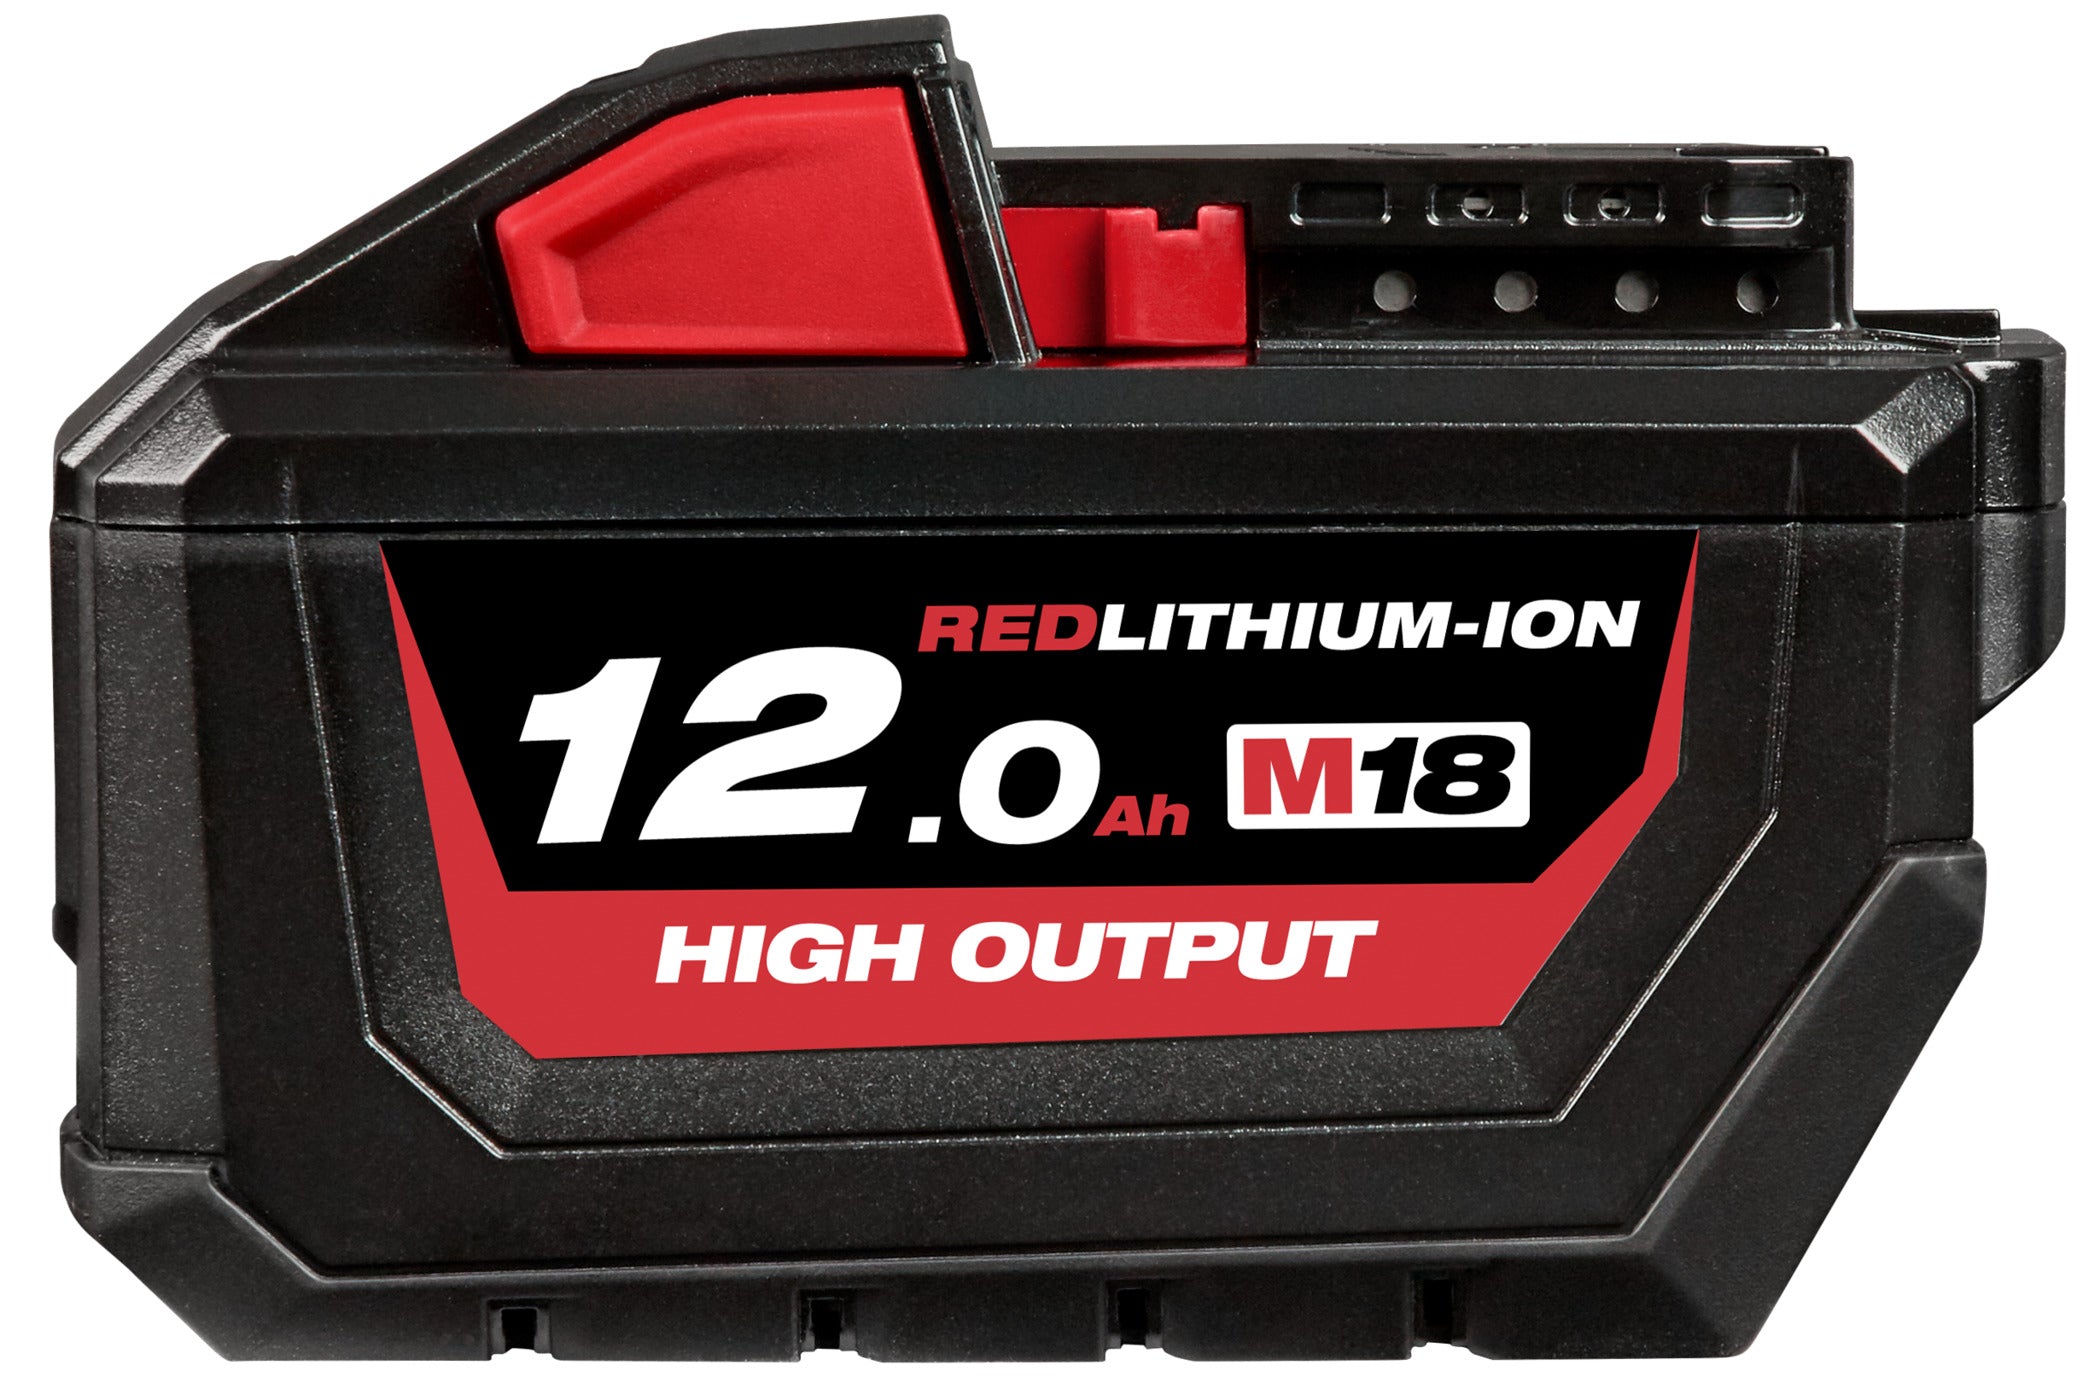 Battery M18 12.0Ah REDLITHIUM-ION High Output